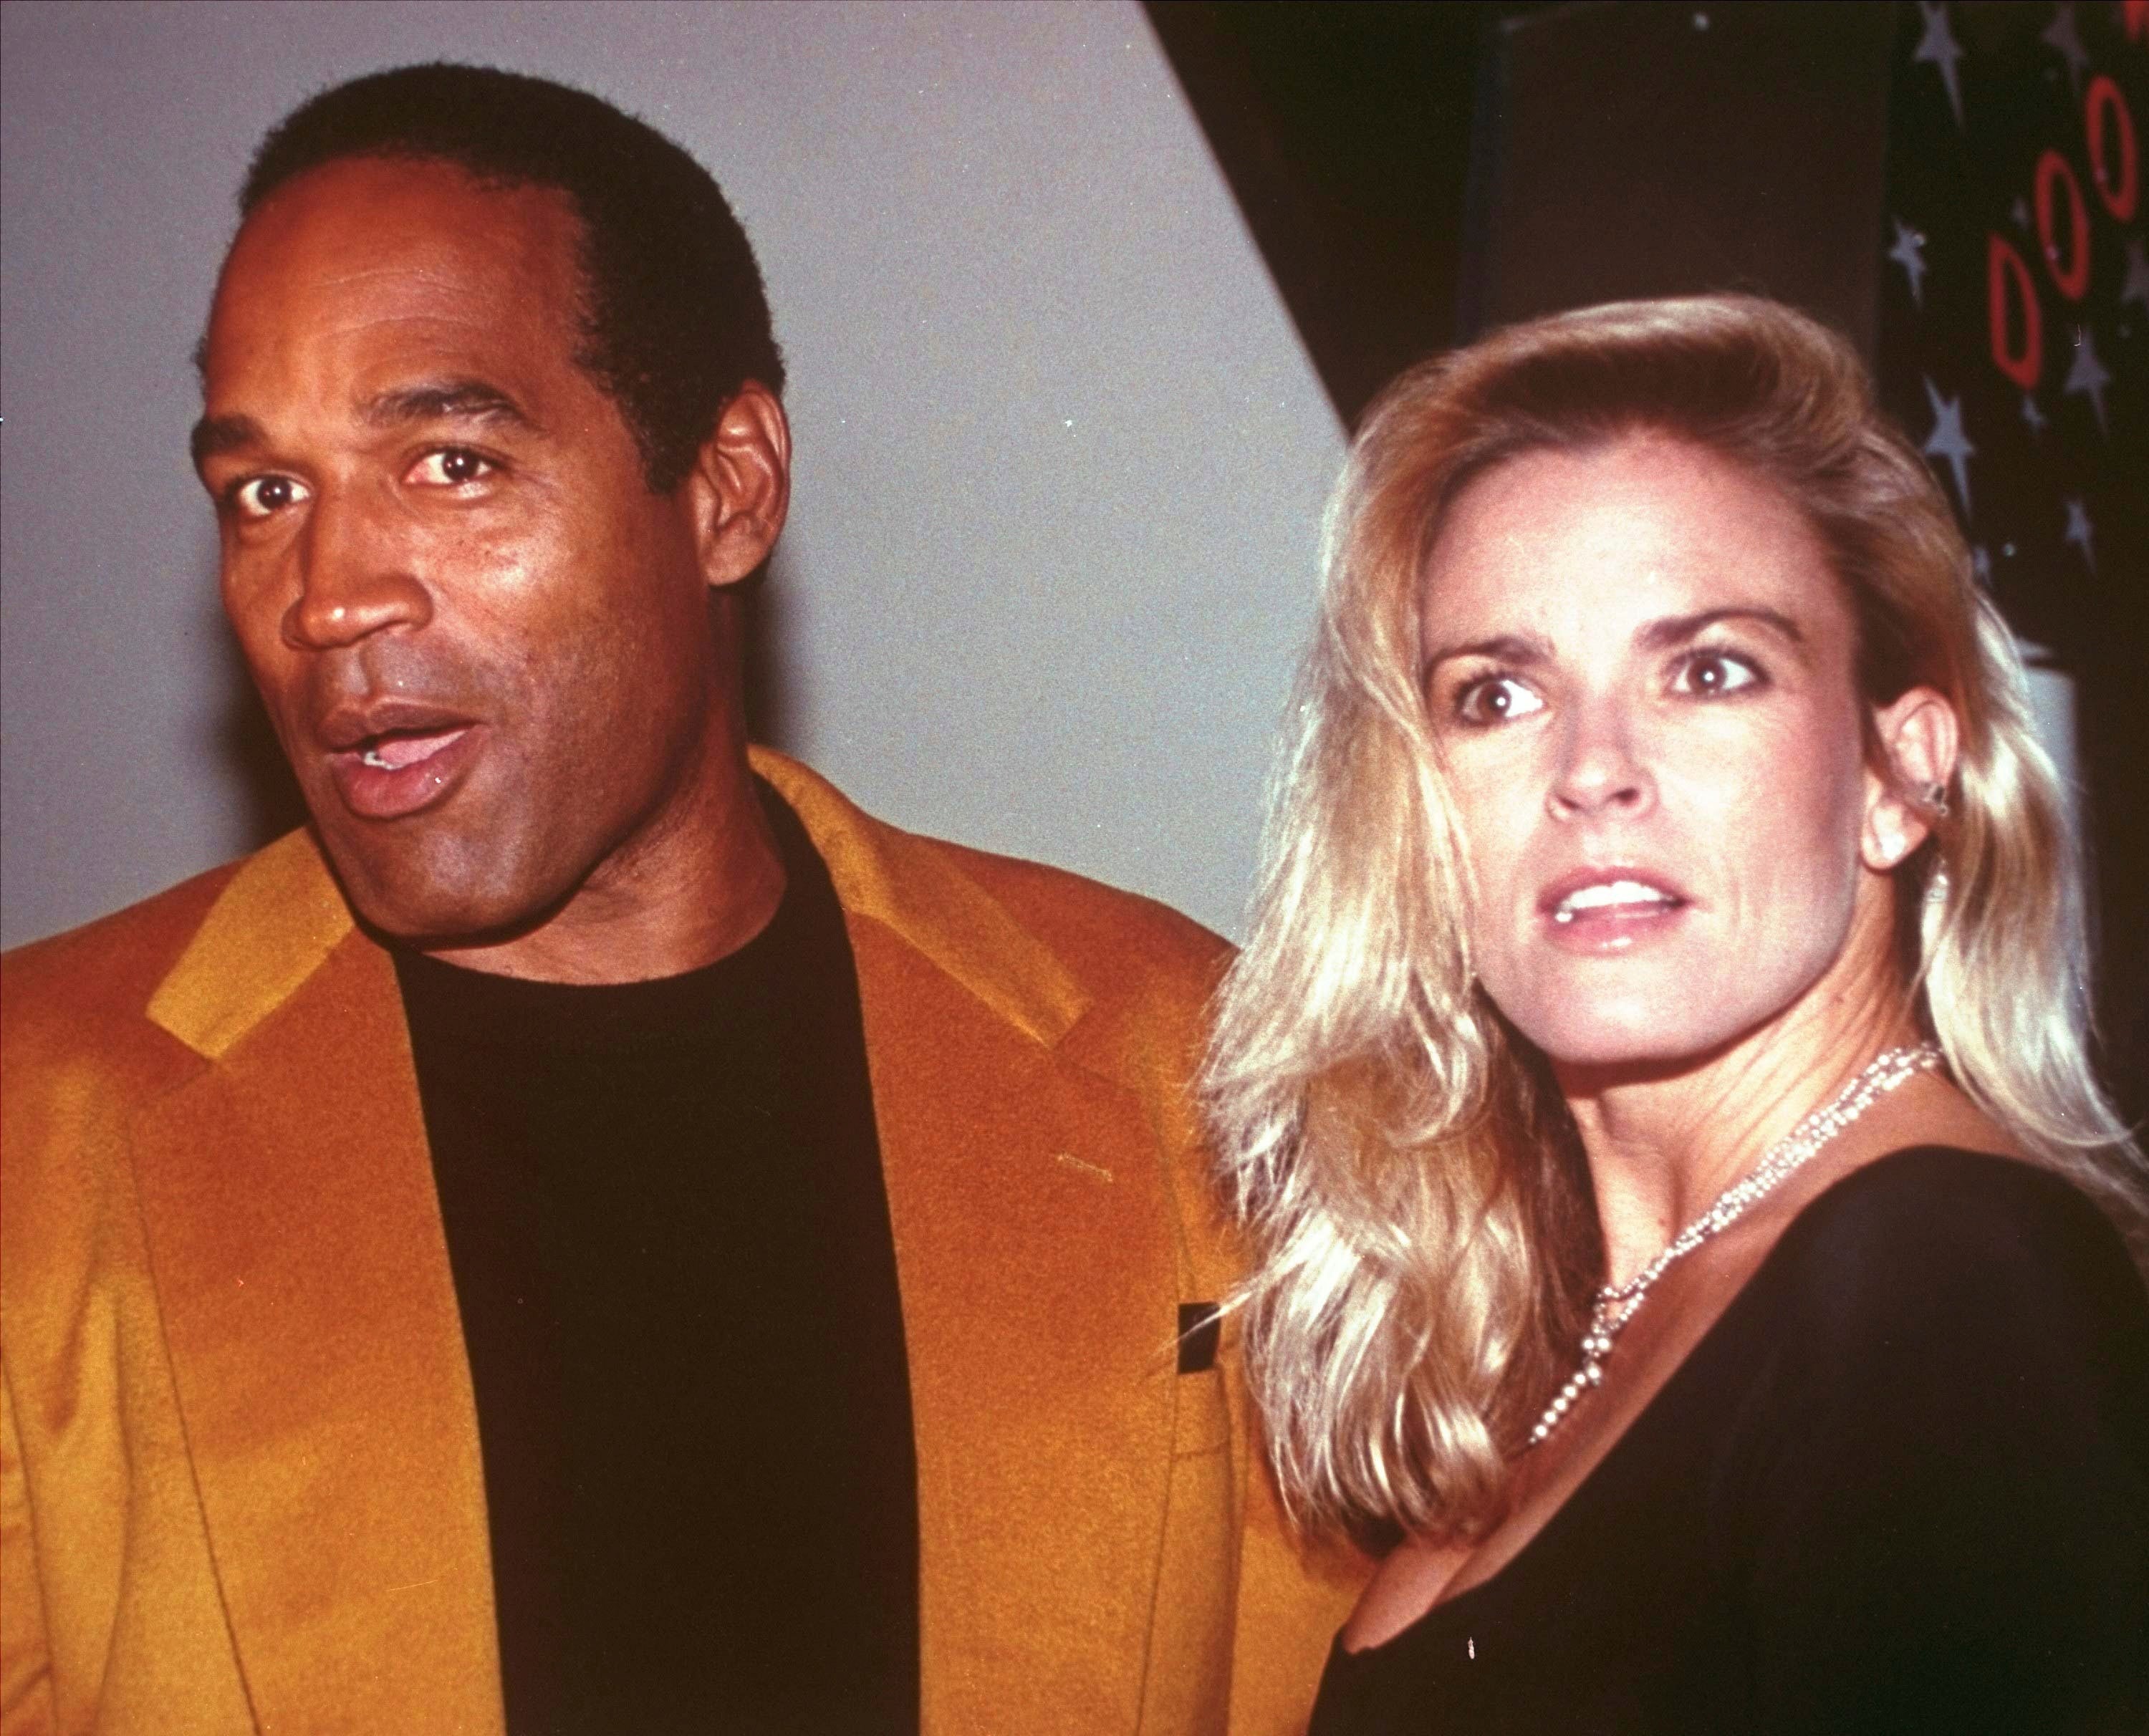 Simpson and his then-wife, Nicole Brown Simpson, arrive for the opening of the Harley-Davidson Cafe in New York on Oct. 19, 1993.